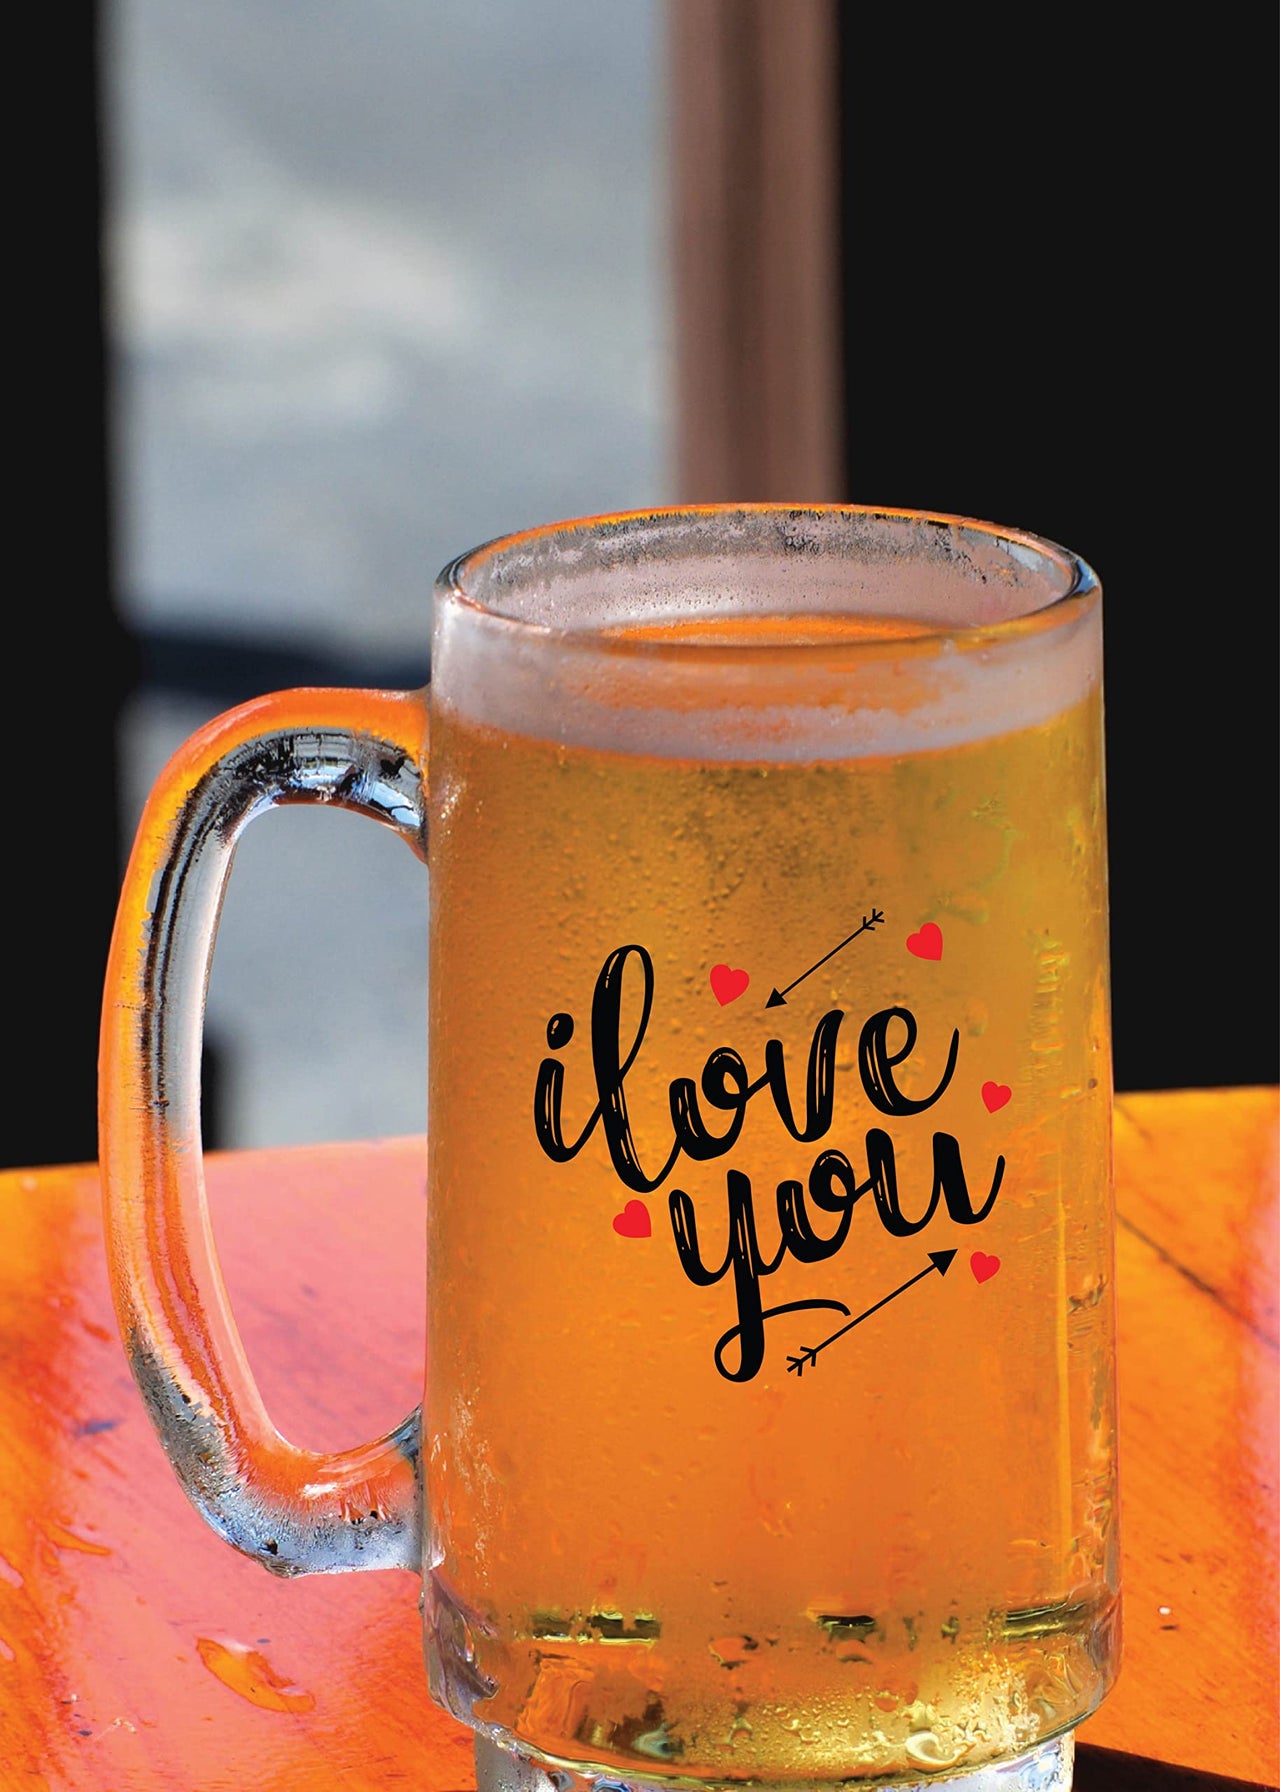 I Love You - Beer Mug - 1 Piece, Clear, 500 ml - Transparent Glass Beer Mug - Printed Beer Mug with Handle Gift for Men, Dad, Brother, Wife, Girlfriend